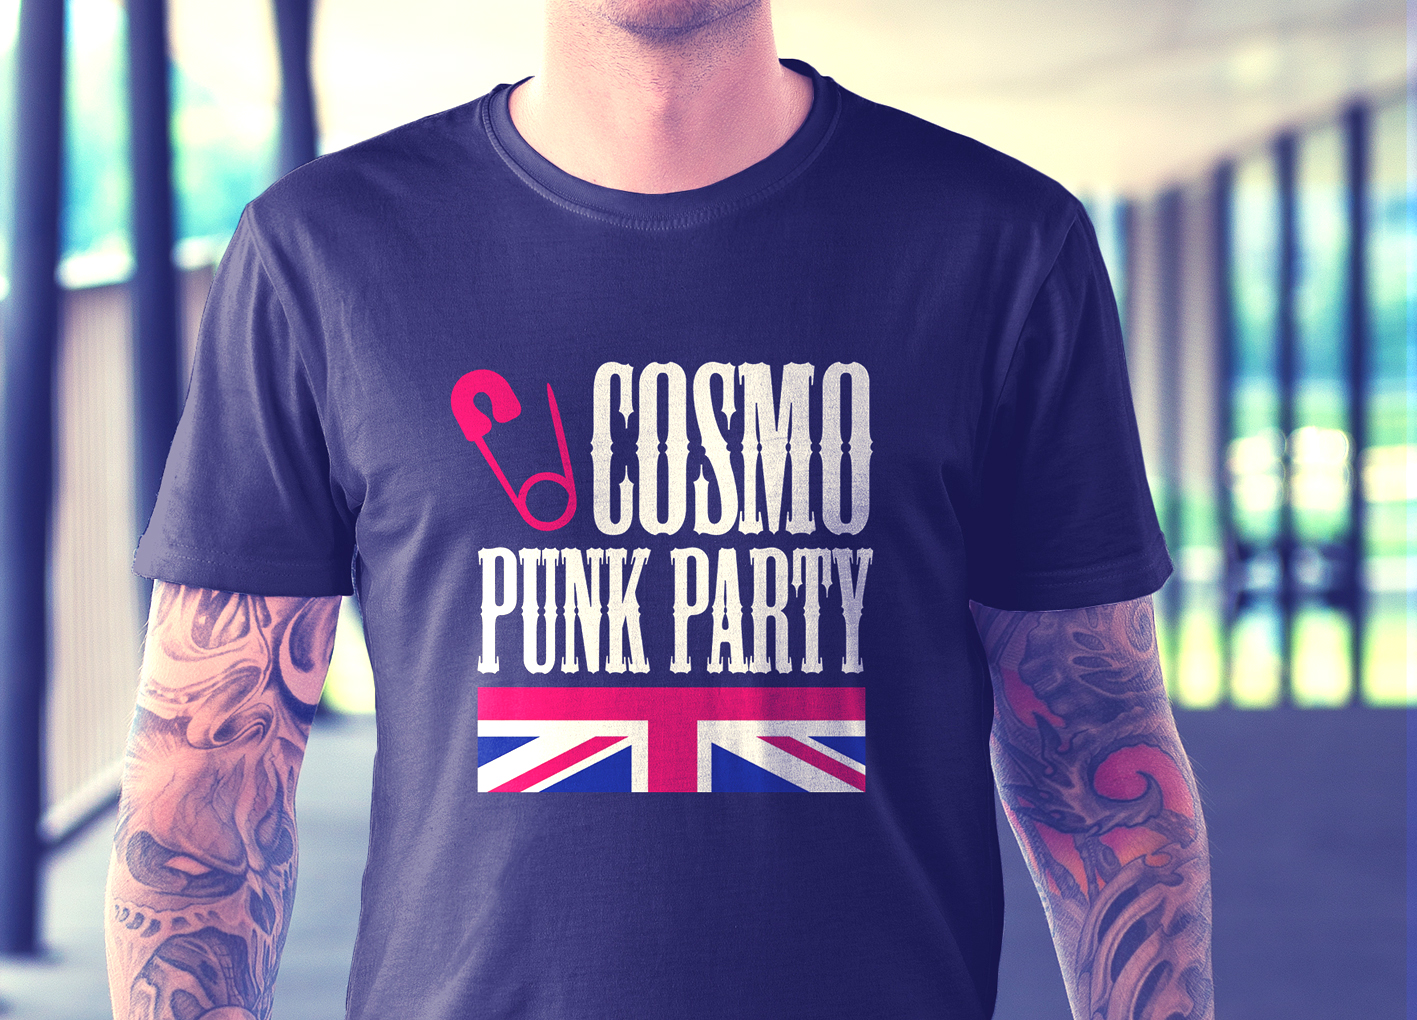 COSMO PUNK tshirt male mockup 2020 - Cosmo Punk Party